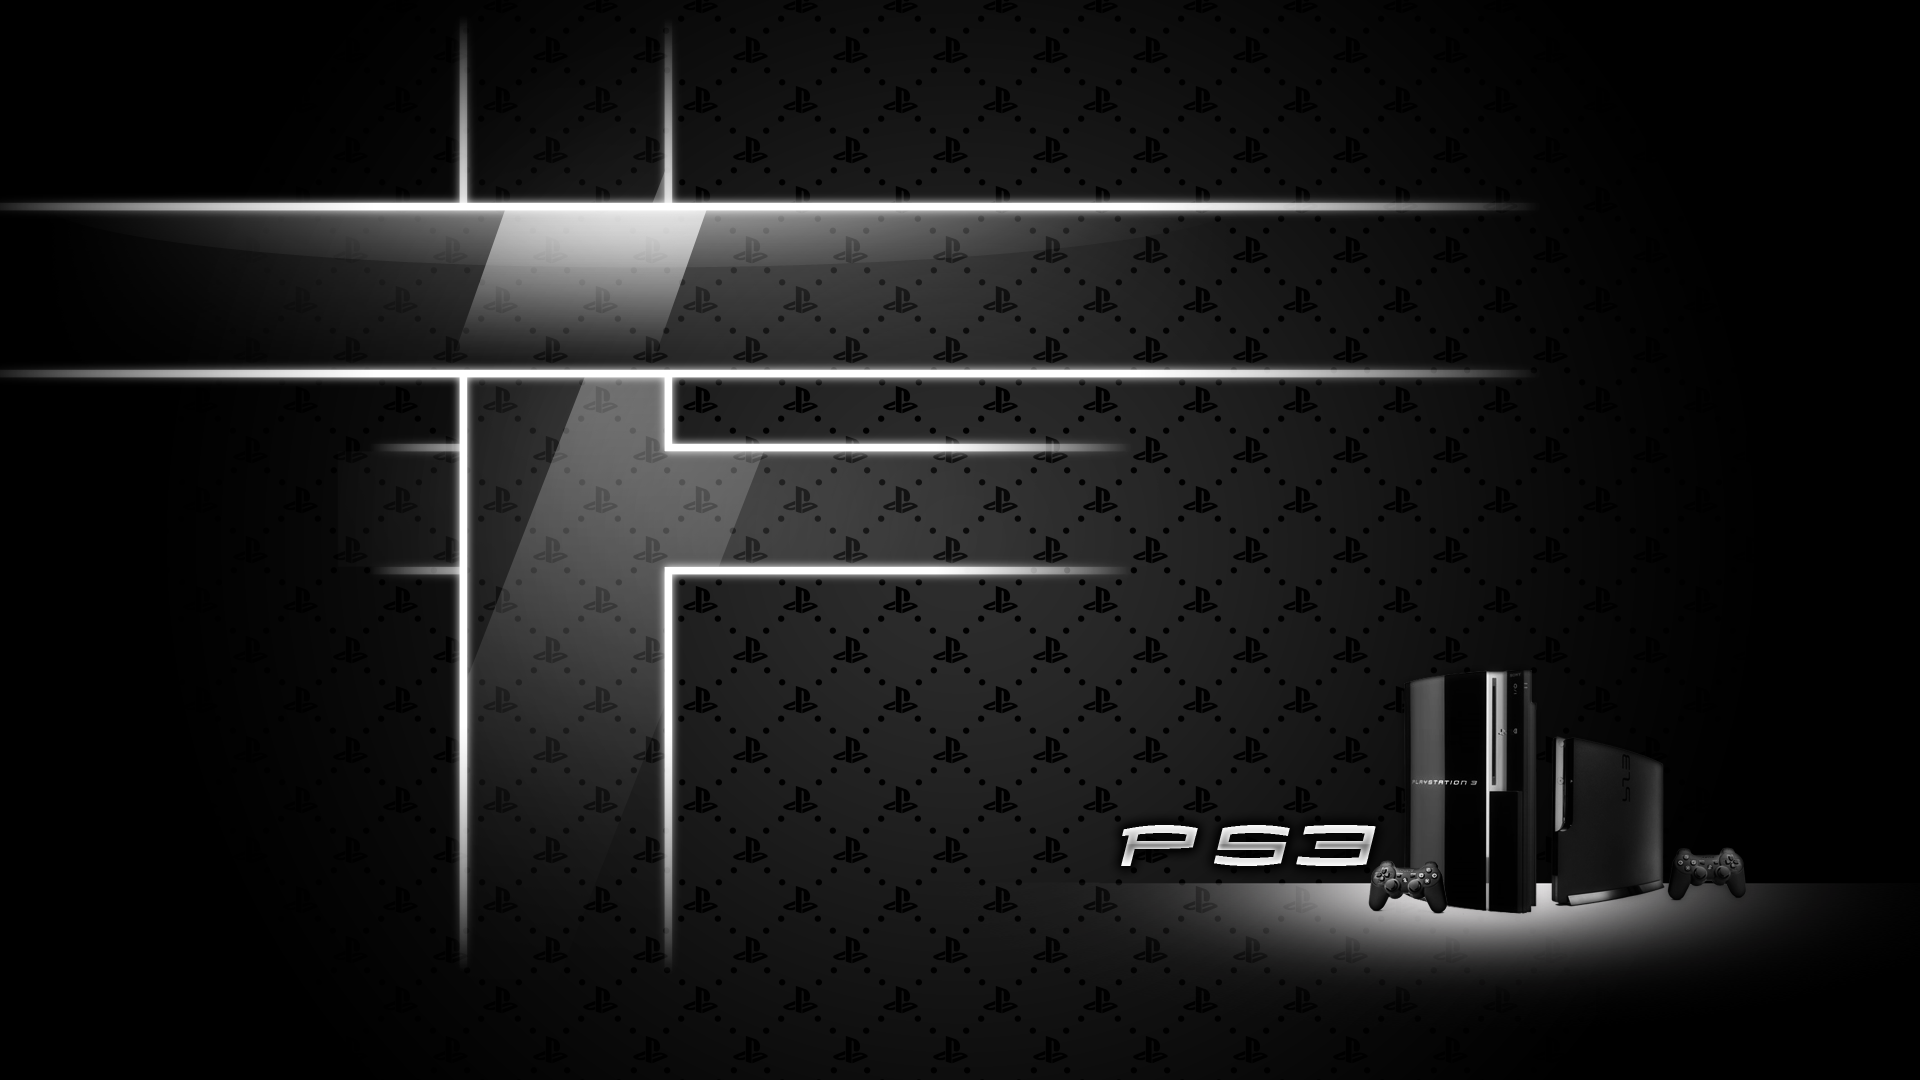 Playstation 3 Wallpapers